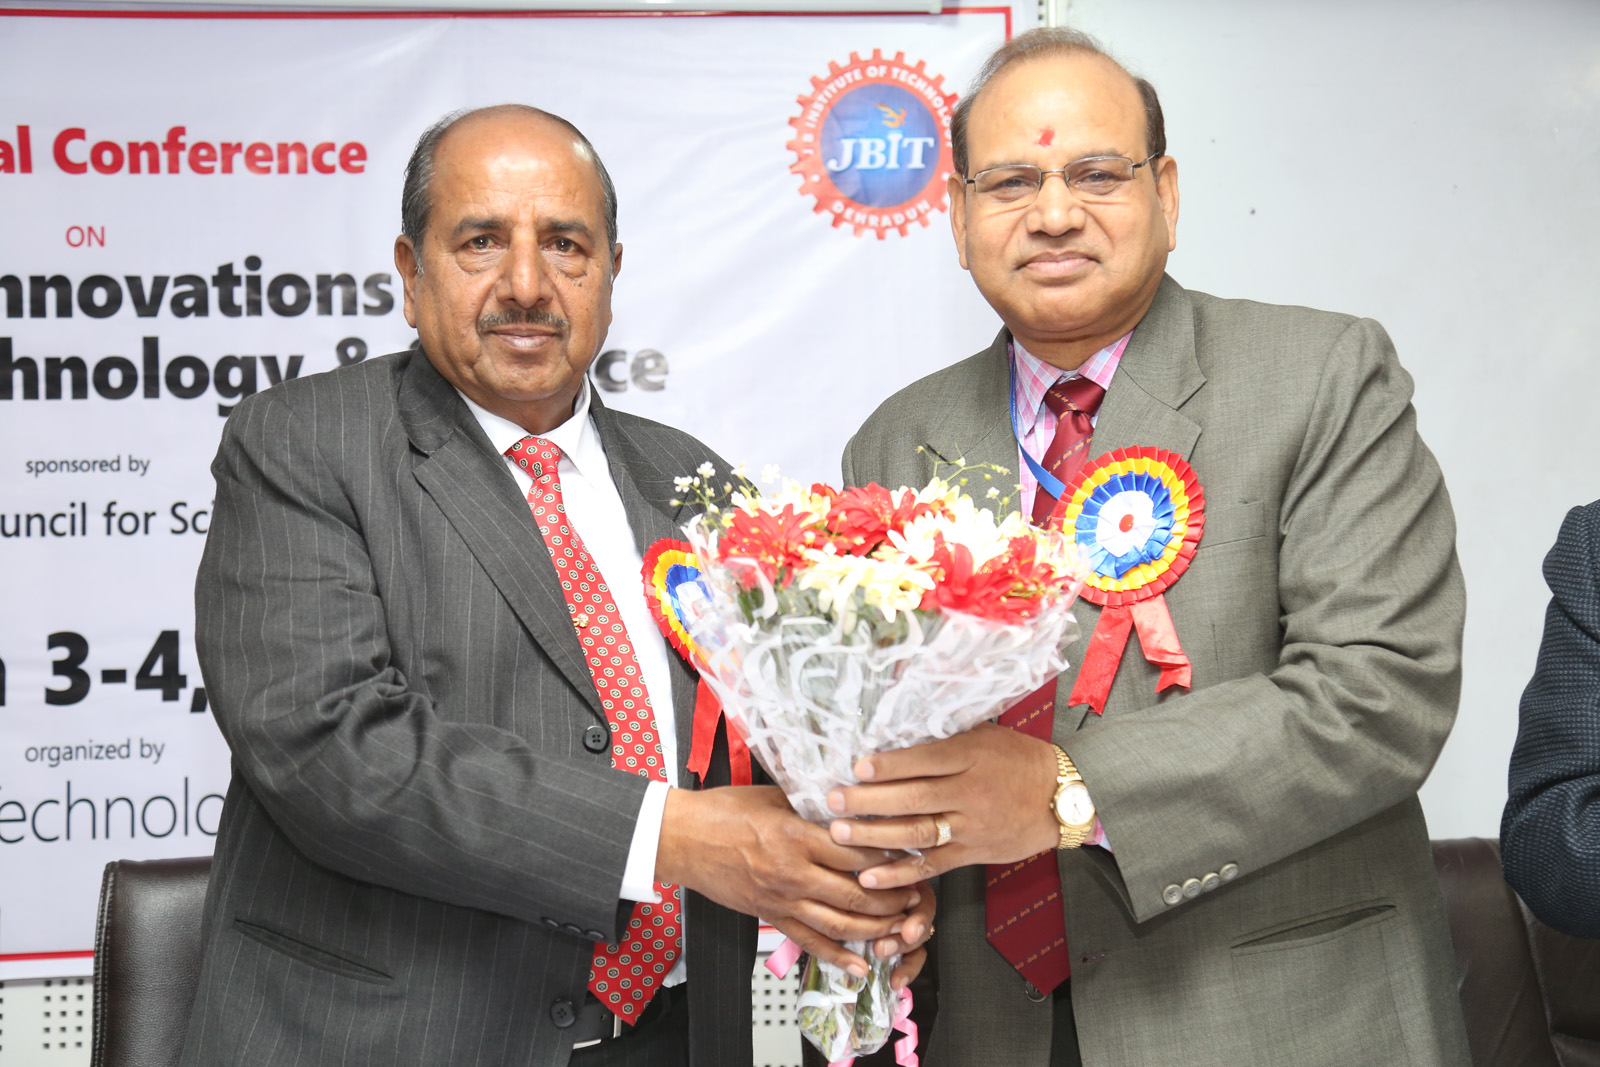 National Conference (NCRIETS) at JBIT